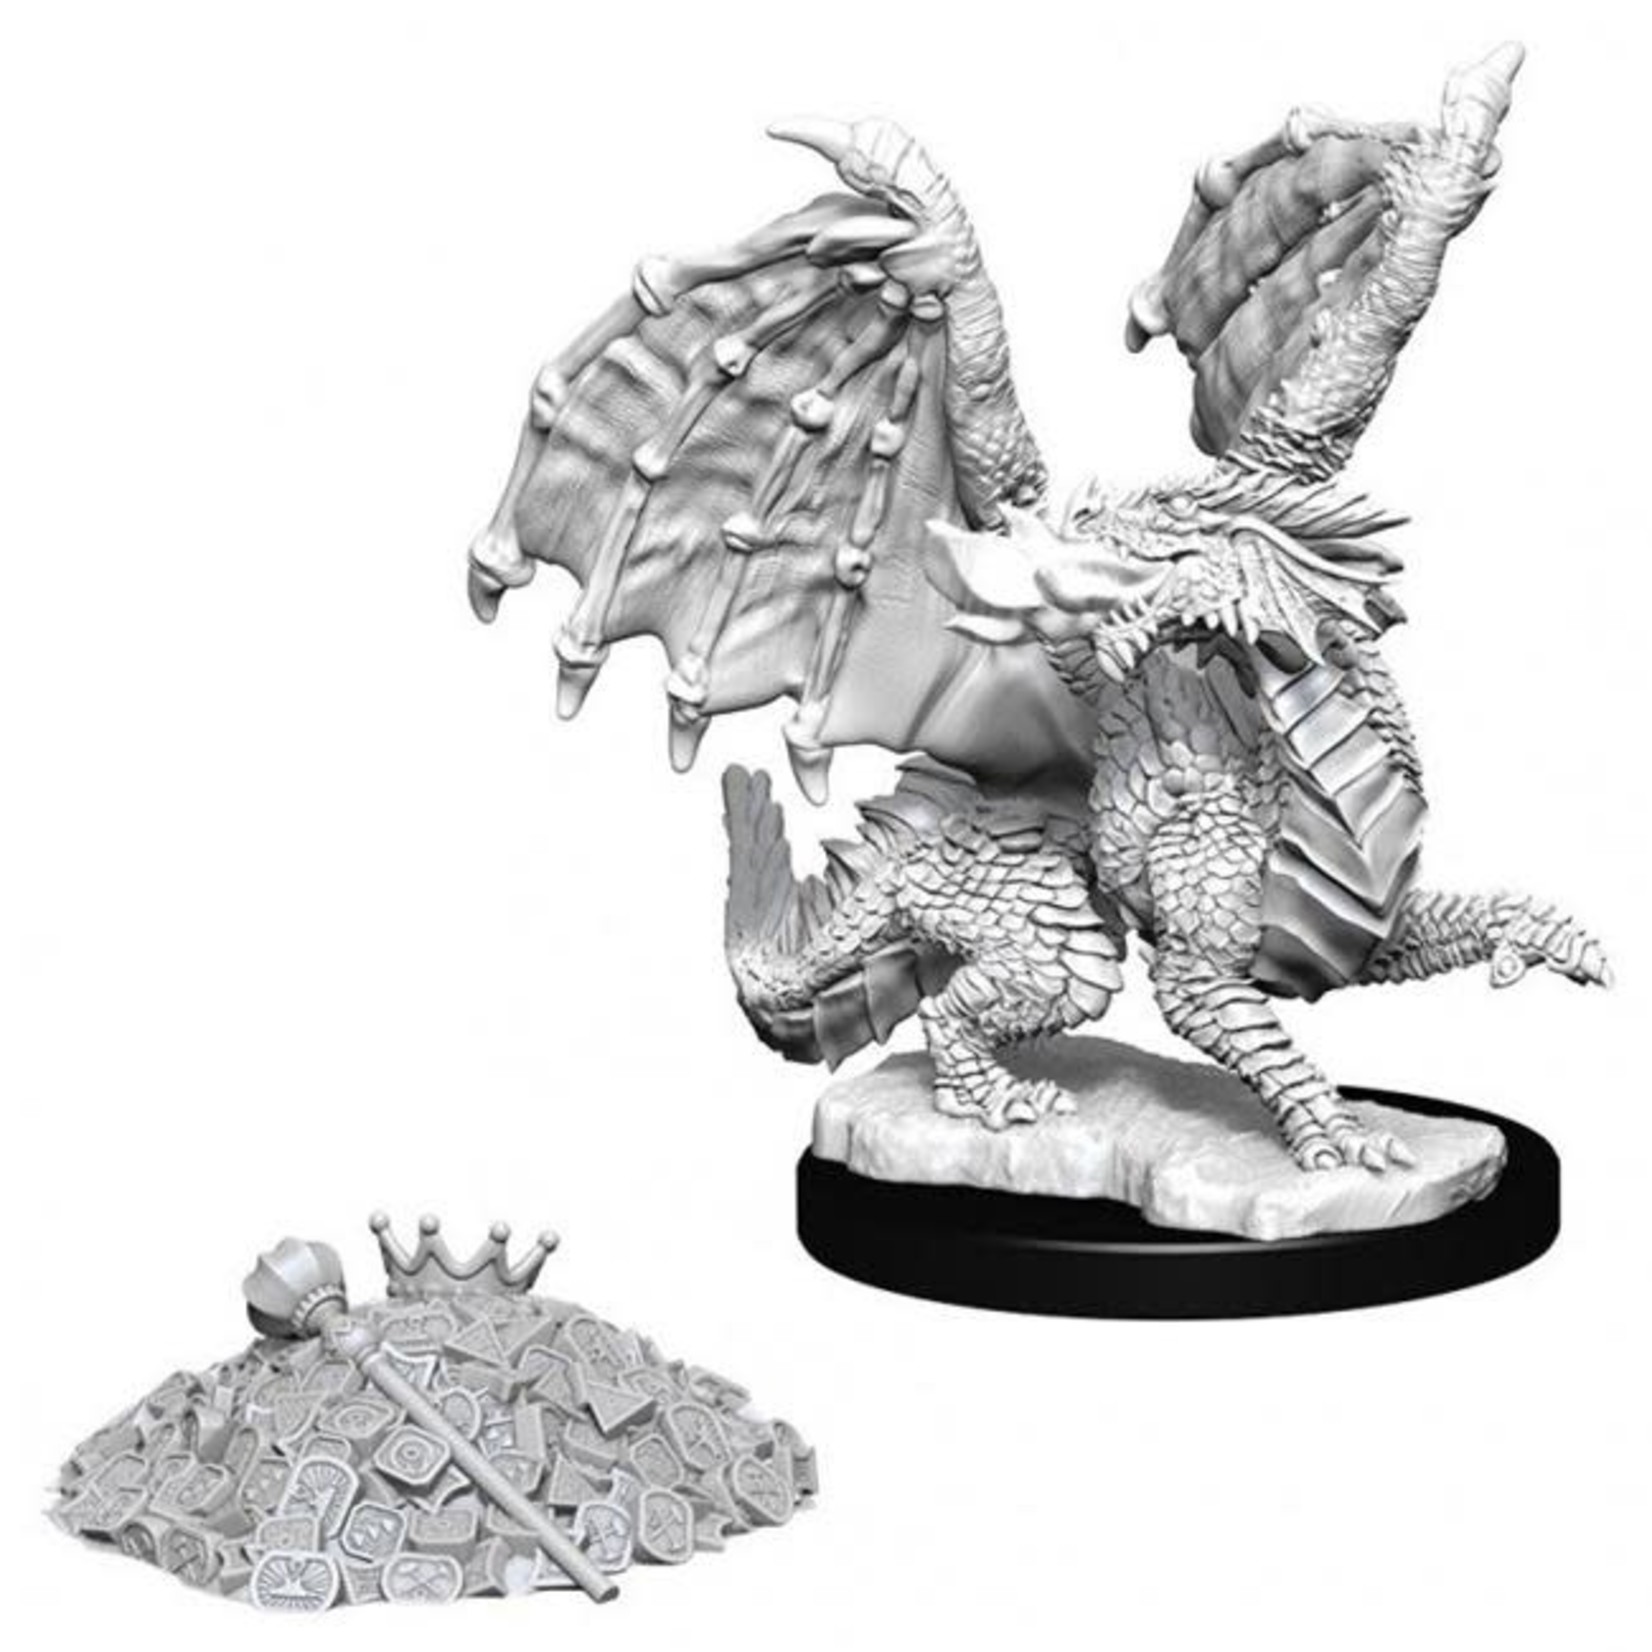 WizKids Dungeons and Dragons Nolzur's Marvelous Minis Red Dragon Wyrmling